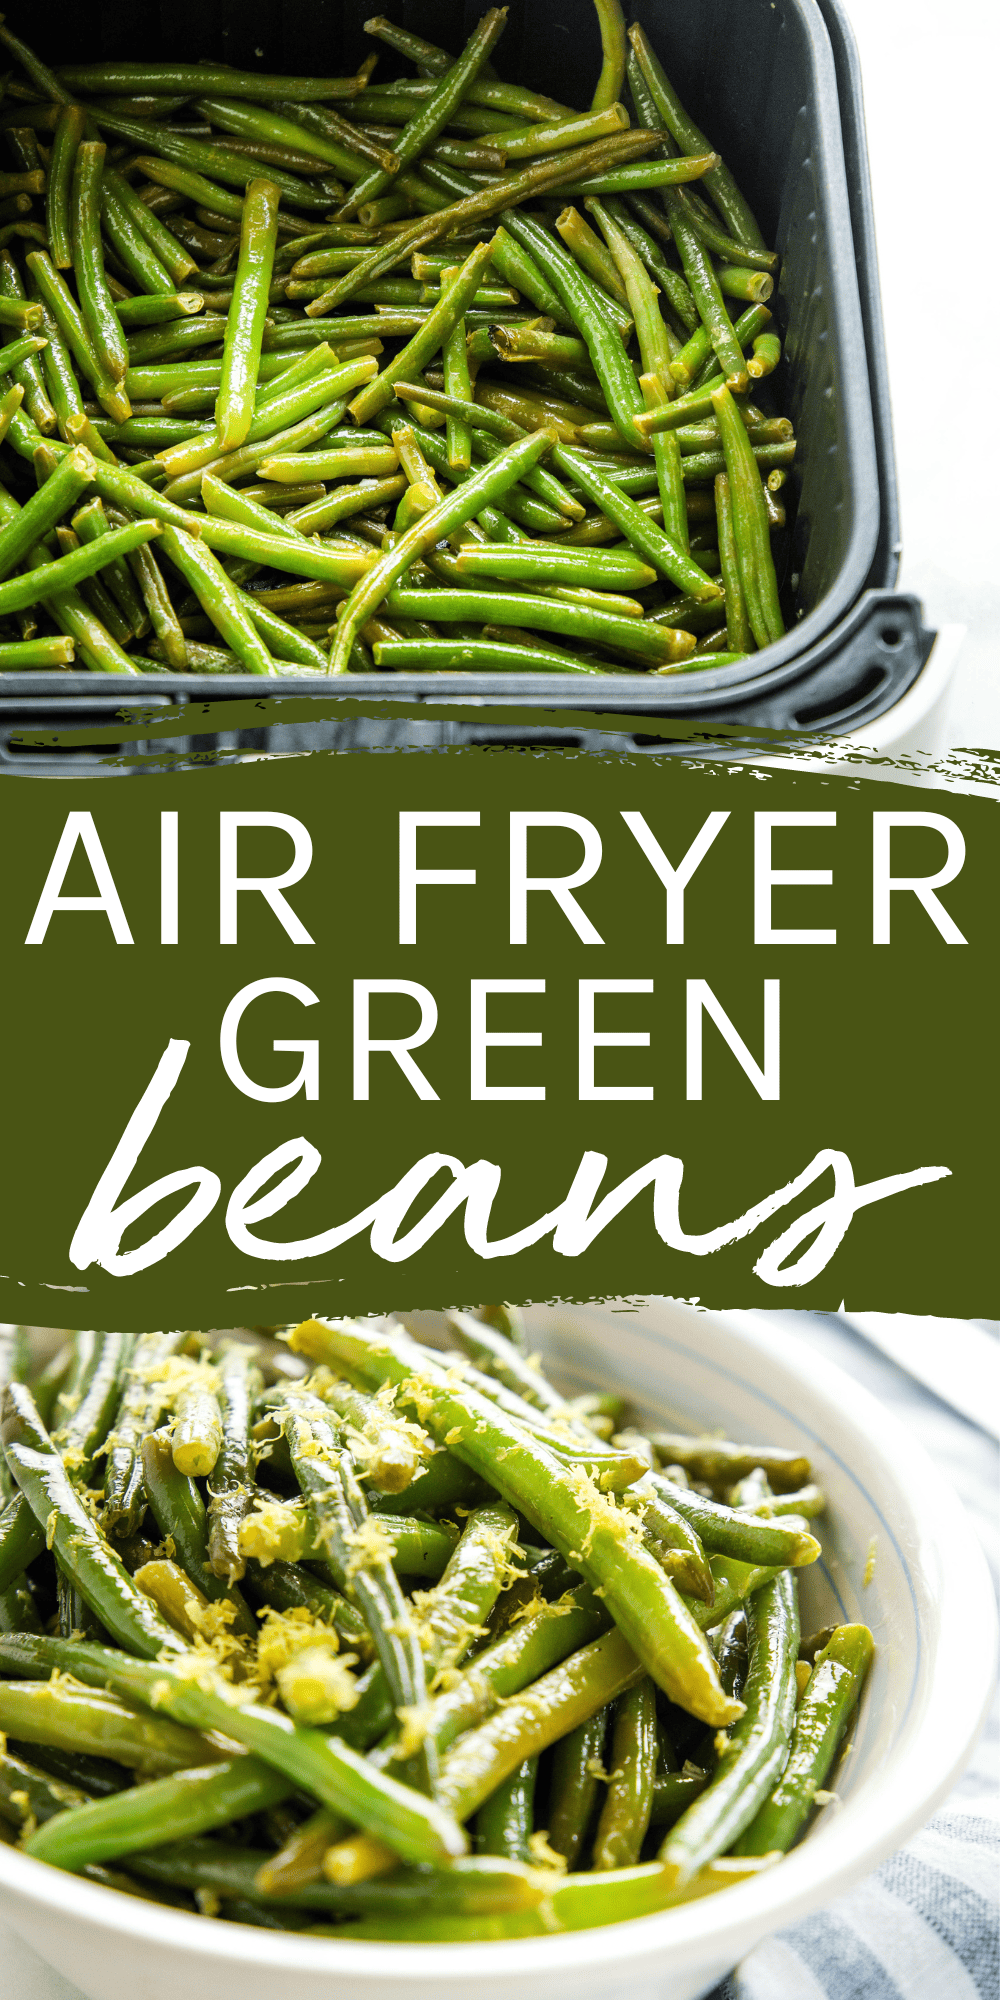 This Air Fryer Green Beans recipe is the perfect easy healthy side dish that's ready in under 10 minutes! Made with fresh or frozen green beans, tender and juicy, with the flavour of oven roasted green beans. Recipe from thebusybaker.ca! #airfryergreenbeans #greenbeans #sidedish #greenbeansidedish #airfryervegetables #airfryersidedish #healthysidedish #healthyairfryerrecipe via @busybakerblog